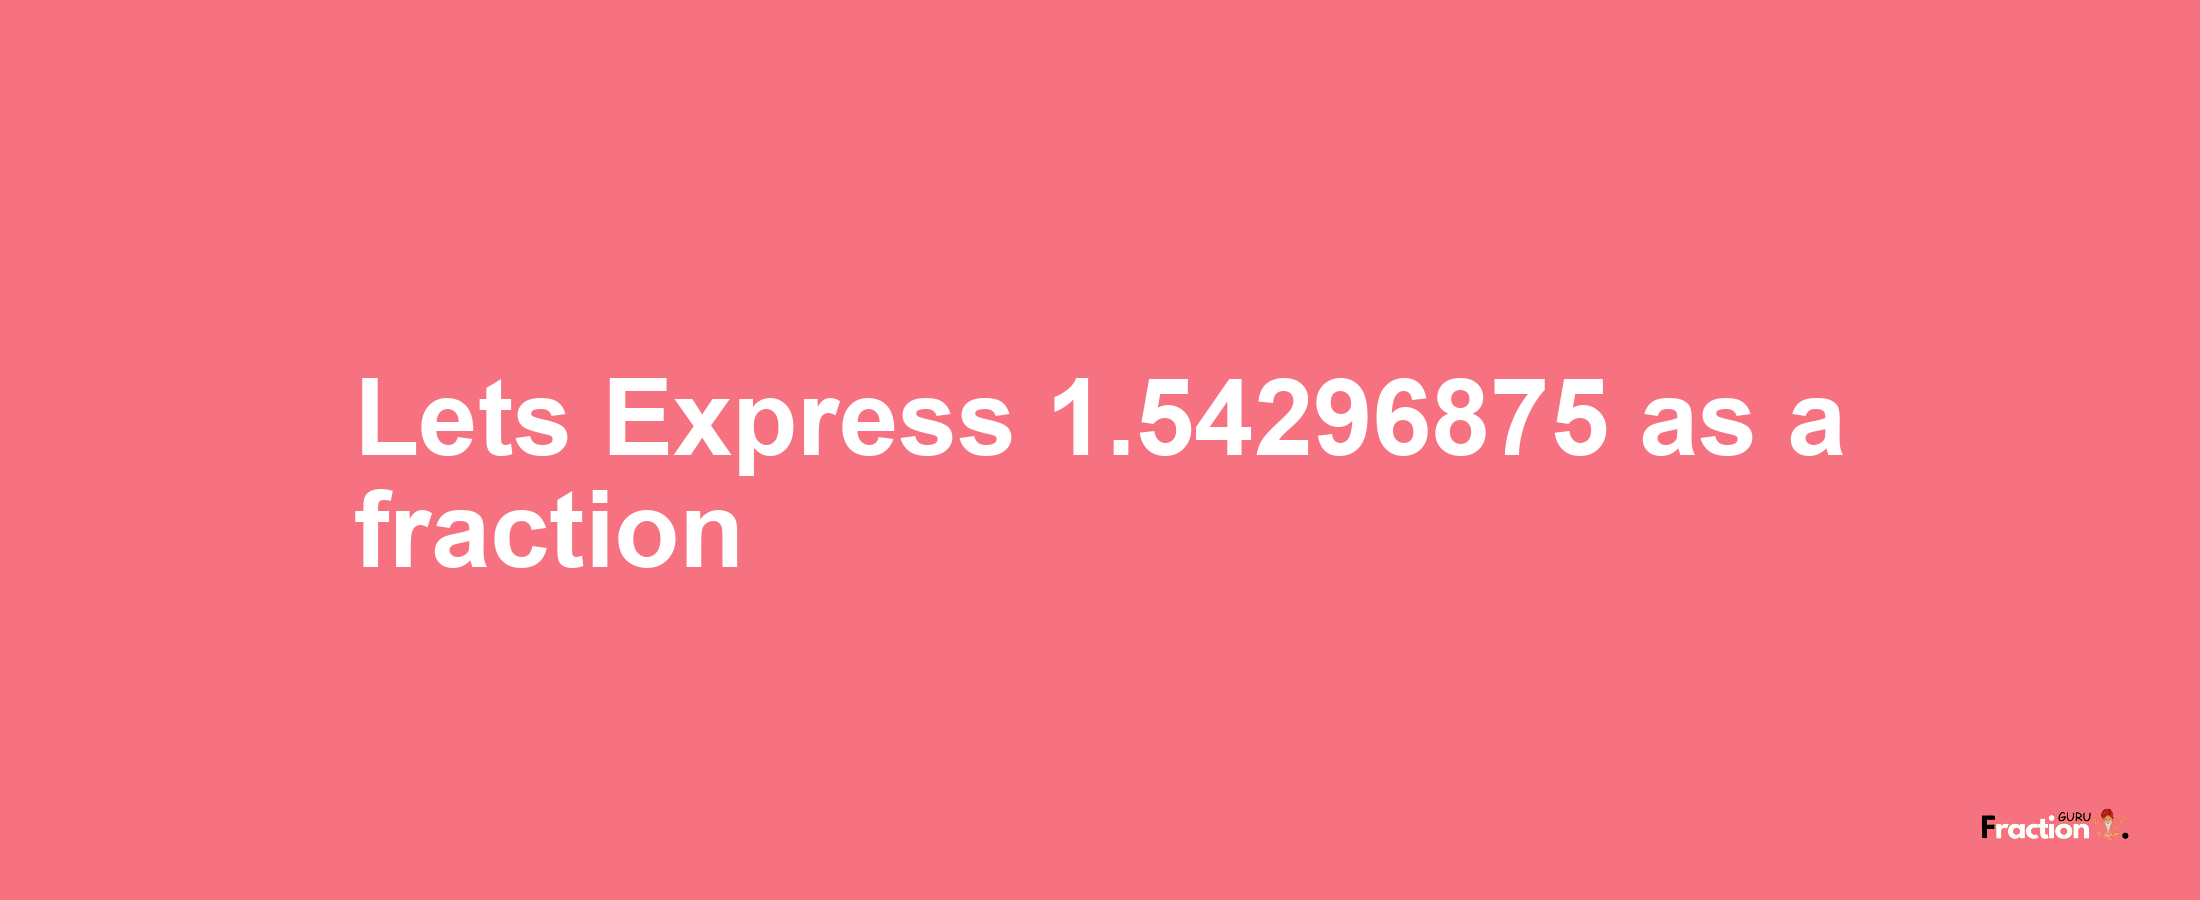 Lets Express 1.54296875 as afraction